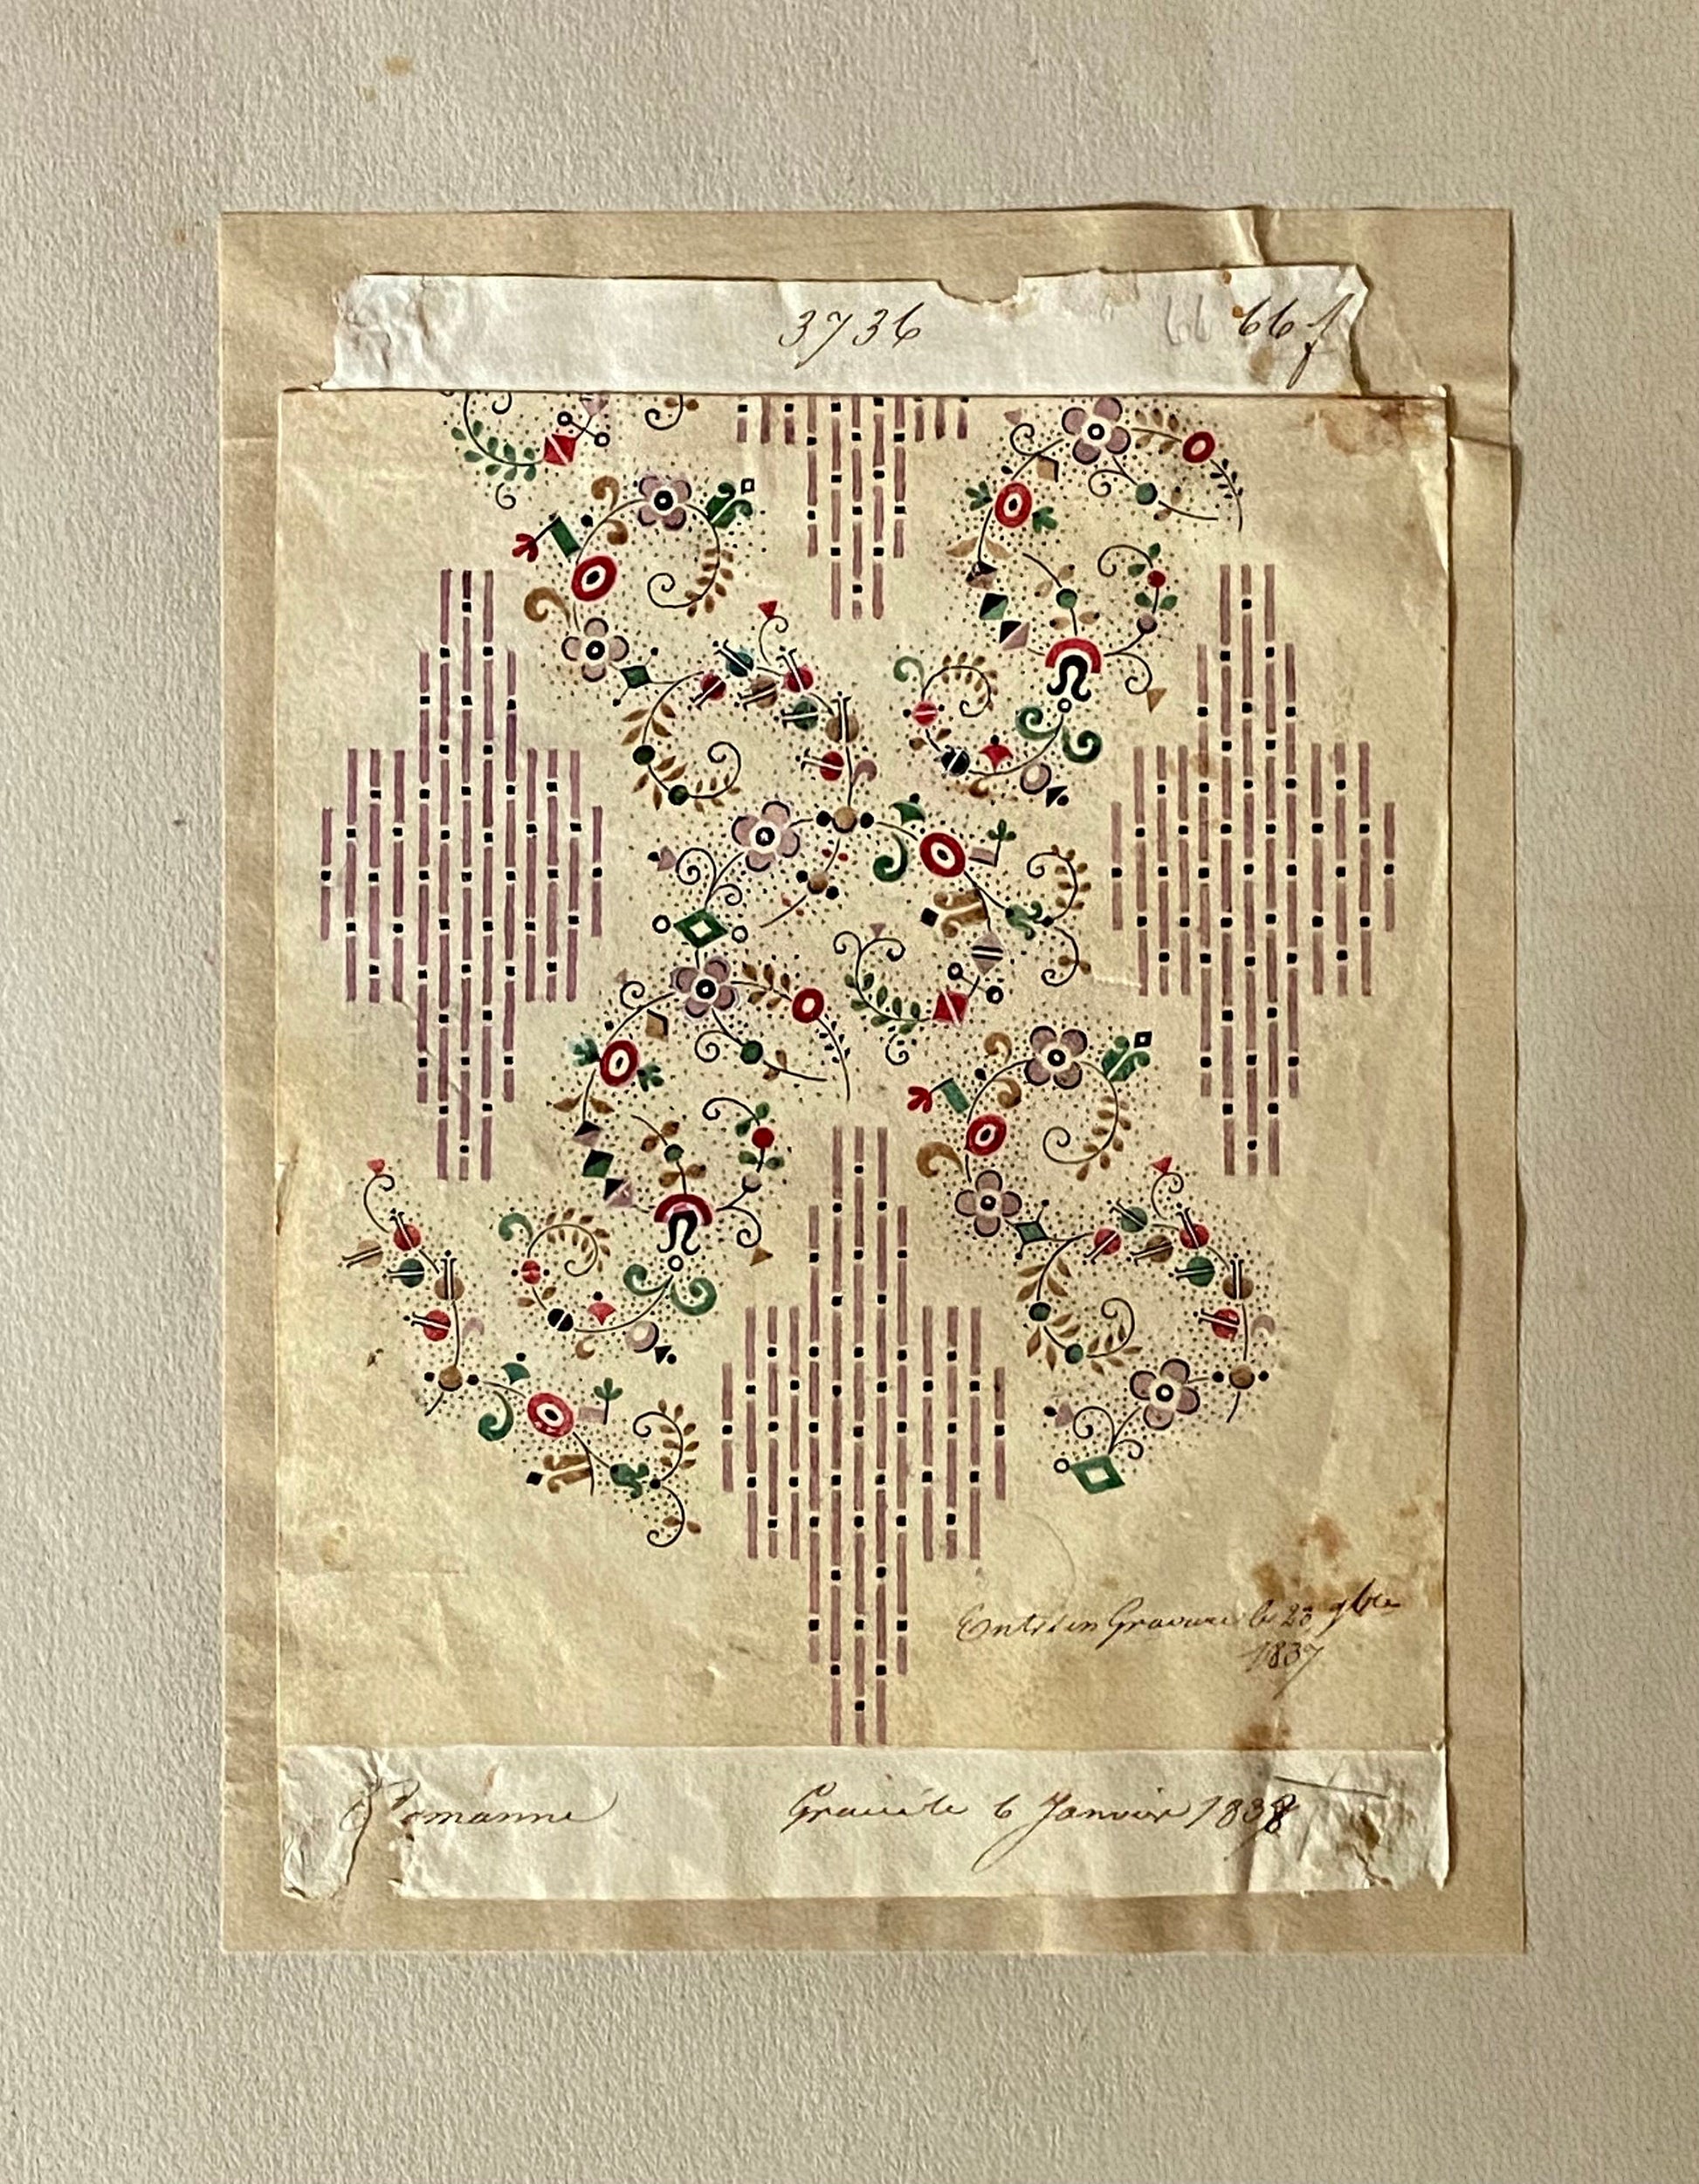 A Genuine 19th Century French Textile Design. Dated 1838. Mounted on Antique Paper. Size: 10.5 x 18.5 cms.